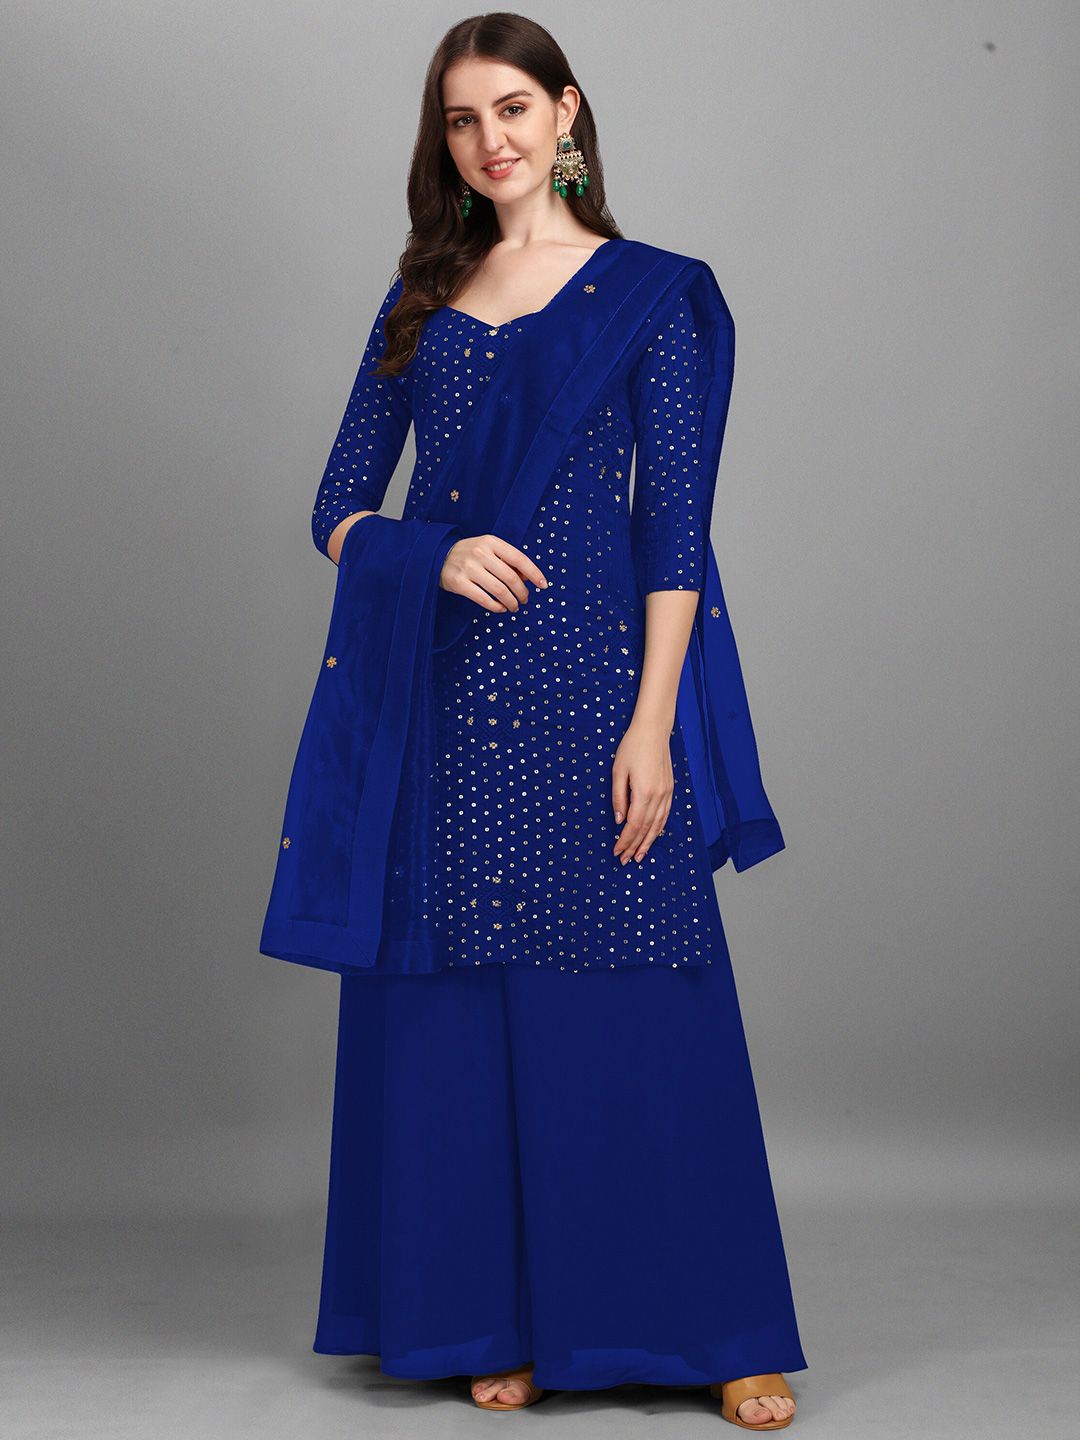 Ethnic Yard Blue & Gold-Toned Embroidered Semi-Stitched Dress Material Price in India